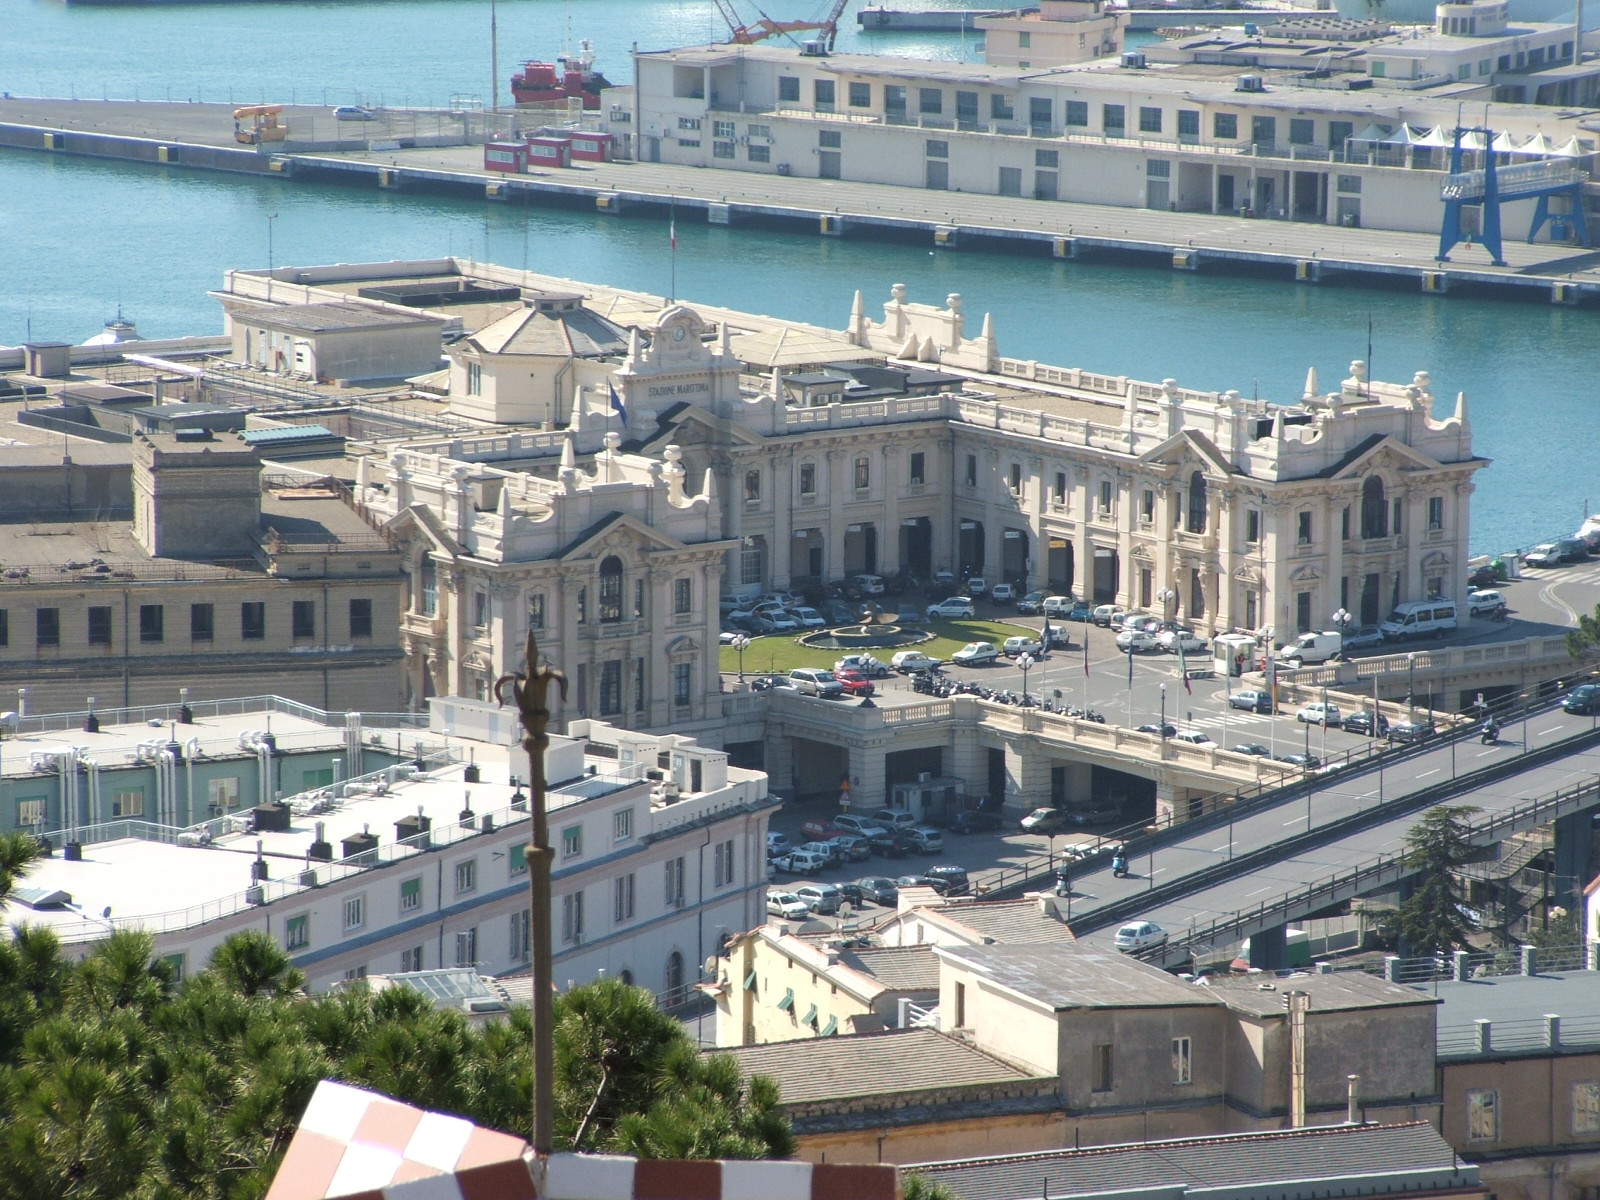 Image of the ferry terminal in Genova